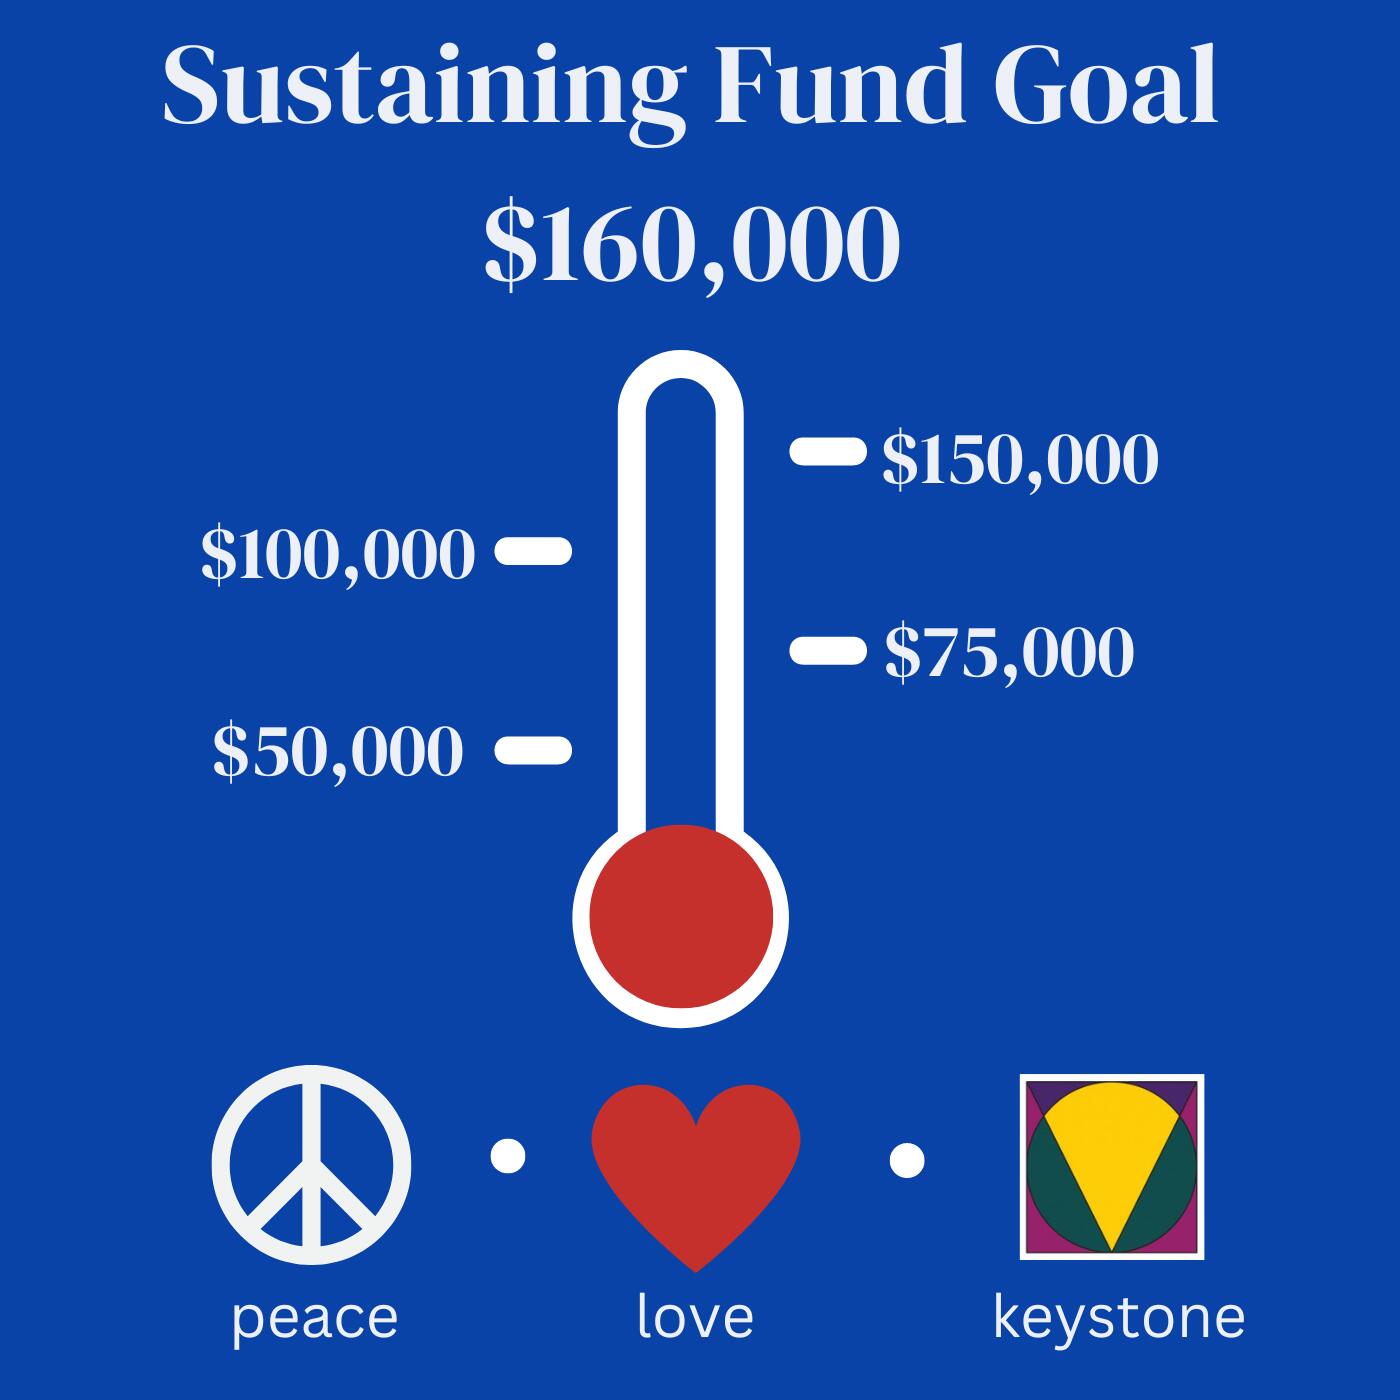 Contribute to the Sustaining Fund